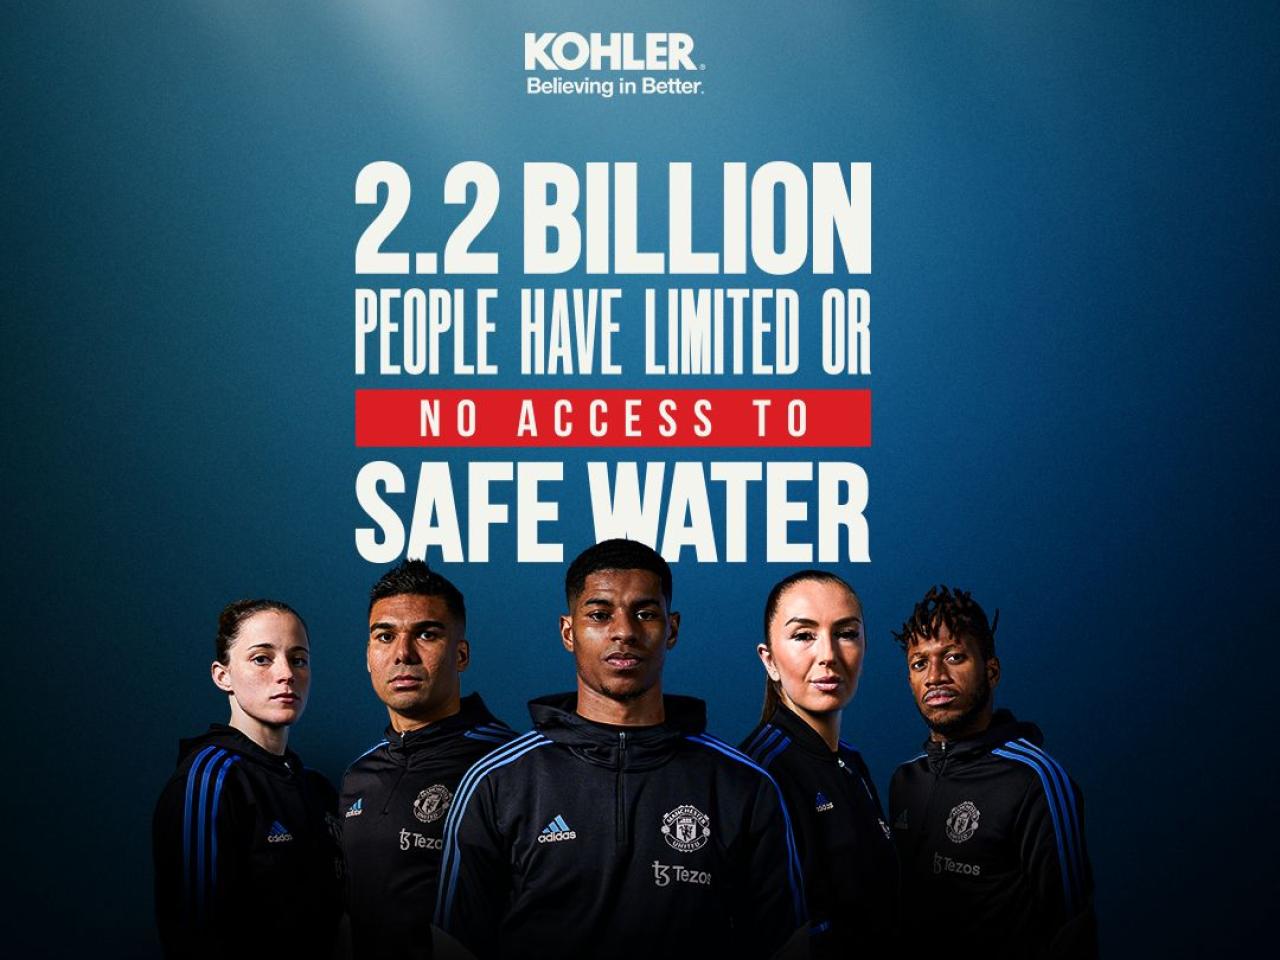 Manchester United players with text that says 2.2 Billion People Have Limited or No Access to Safe Water